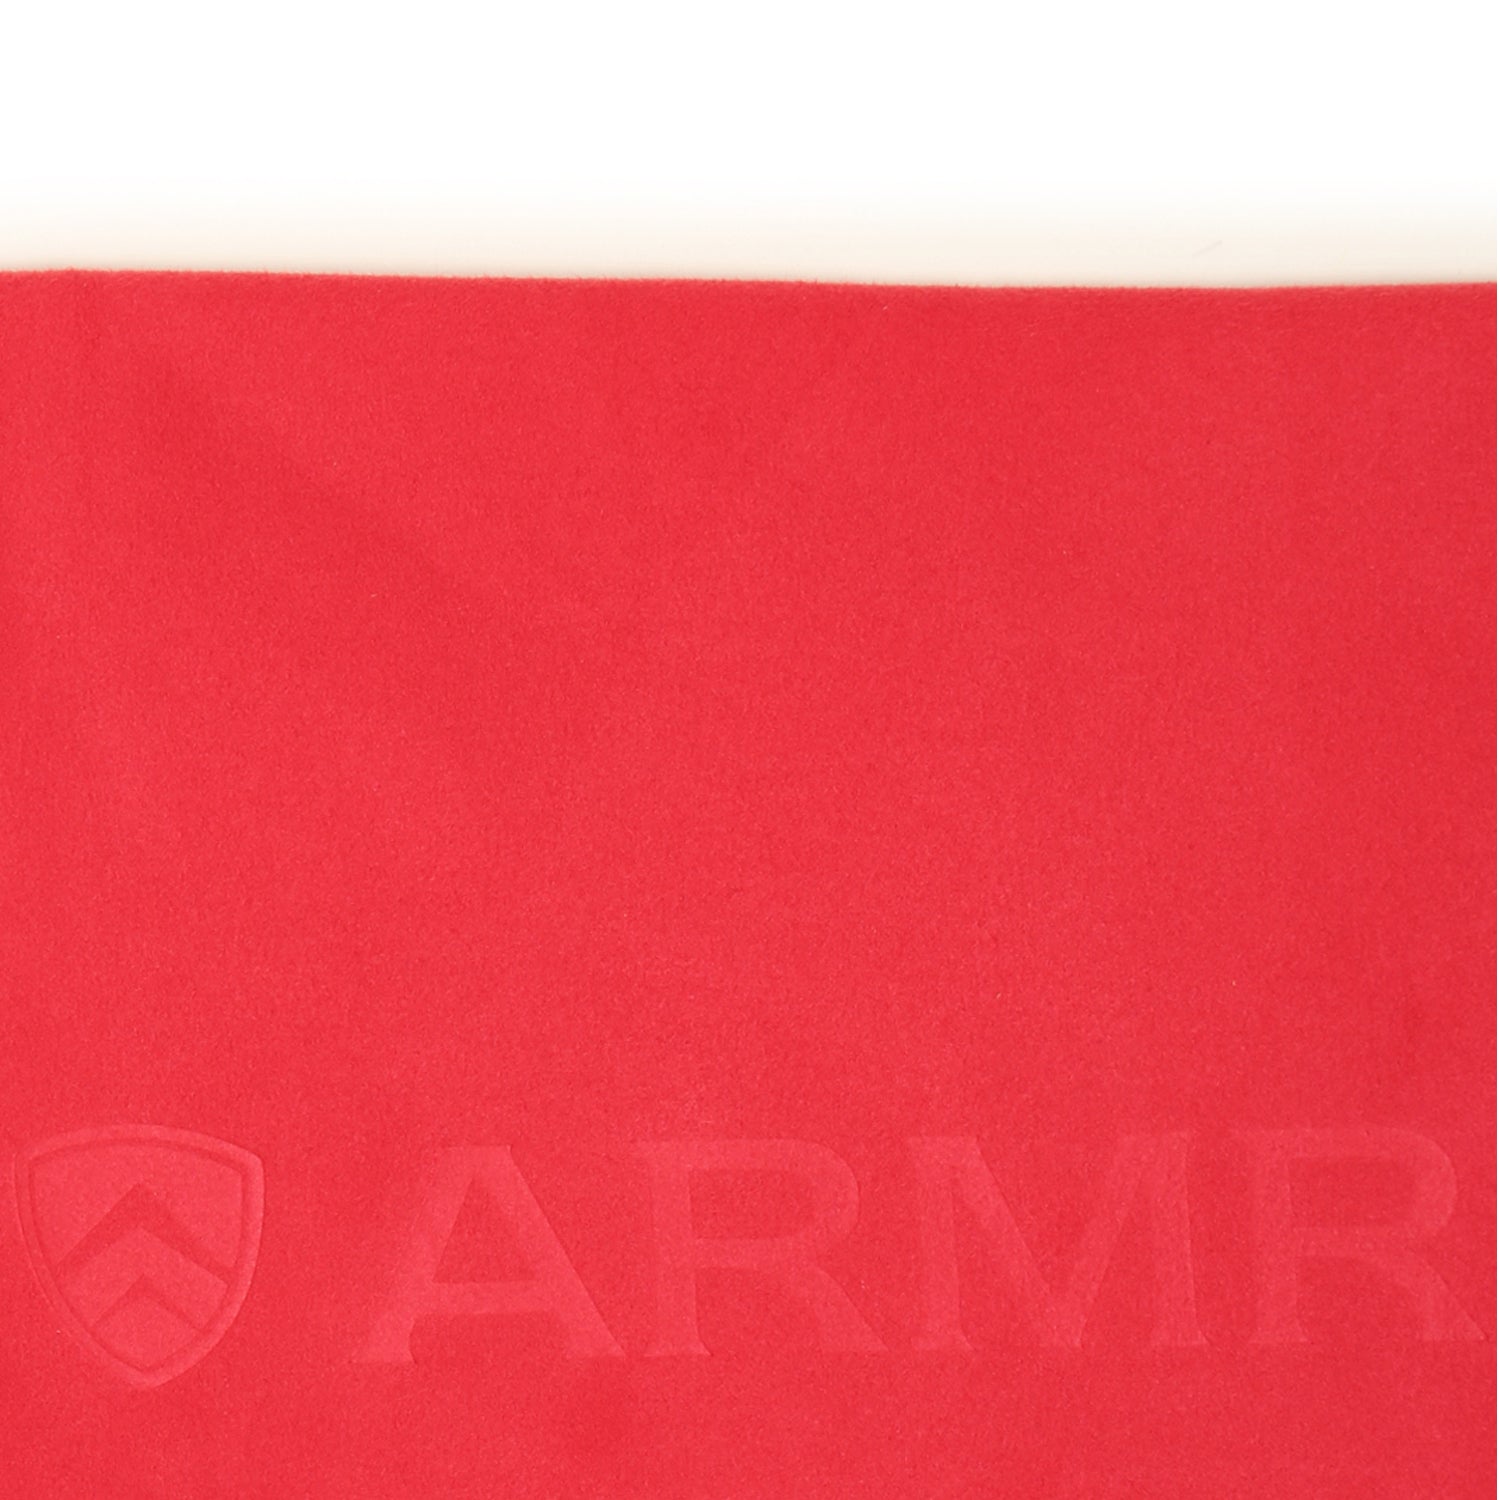 ARMR Unisex RED SPORT Quickdry TOWEL